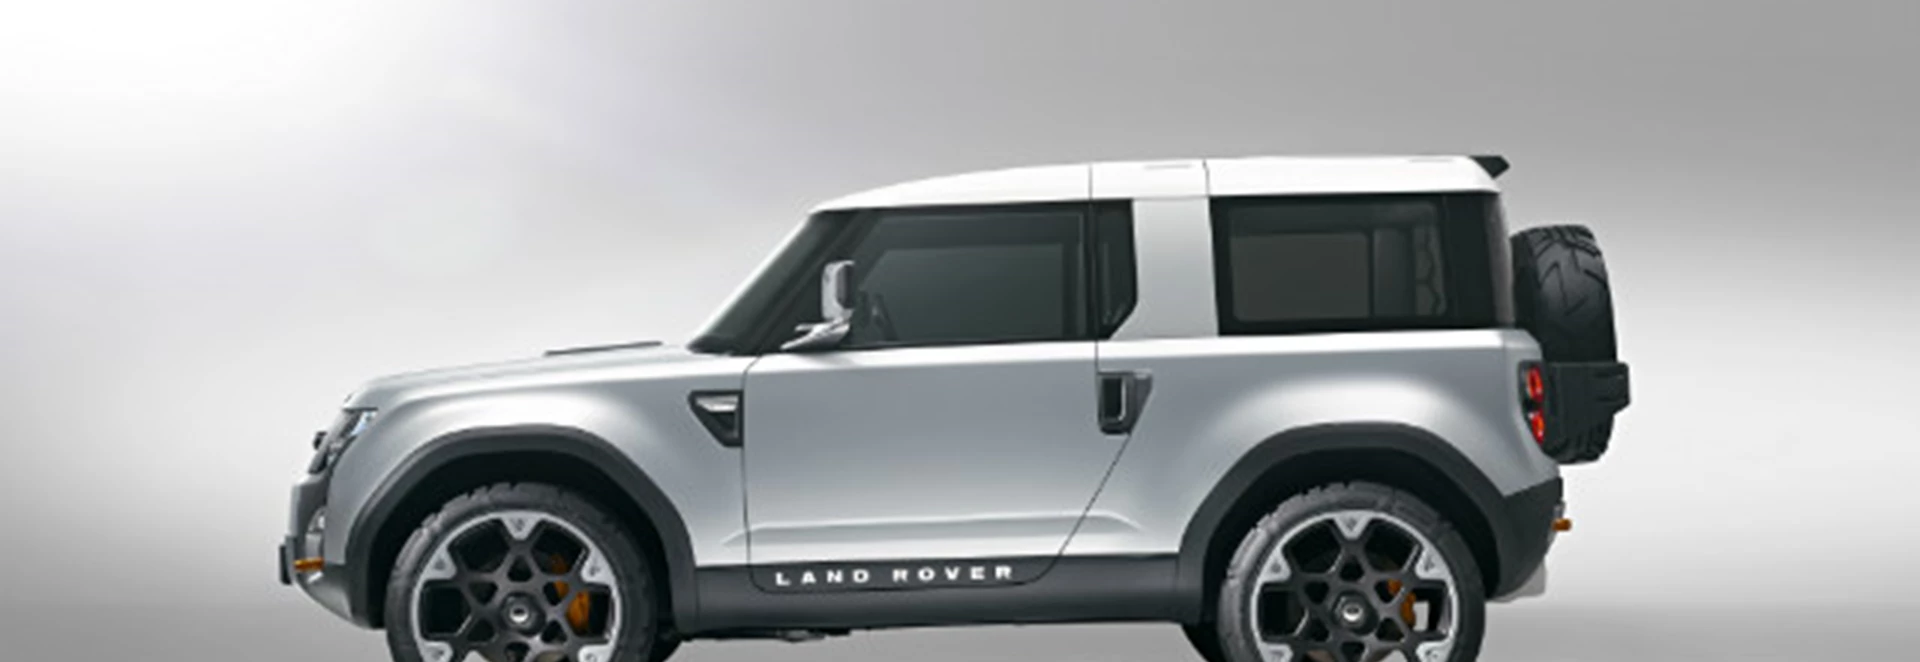 What will the next Land Rover Defender be like?